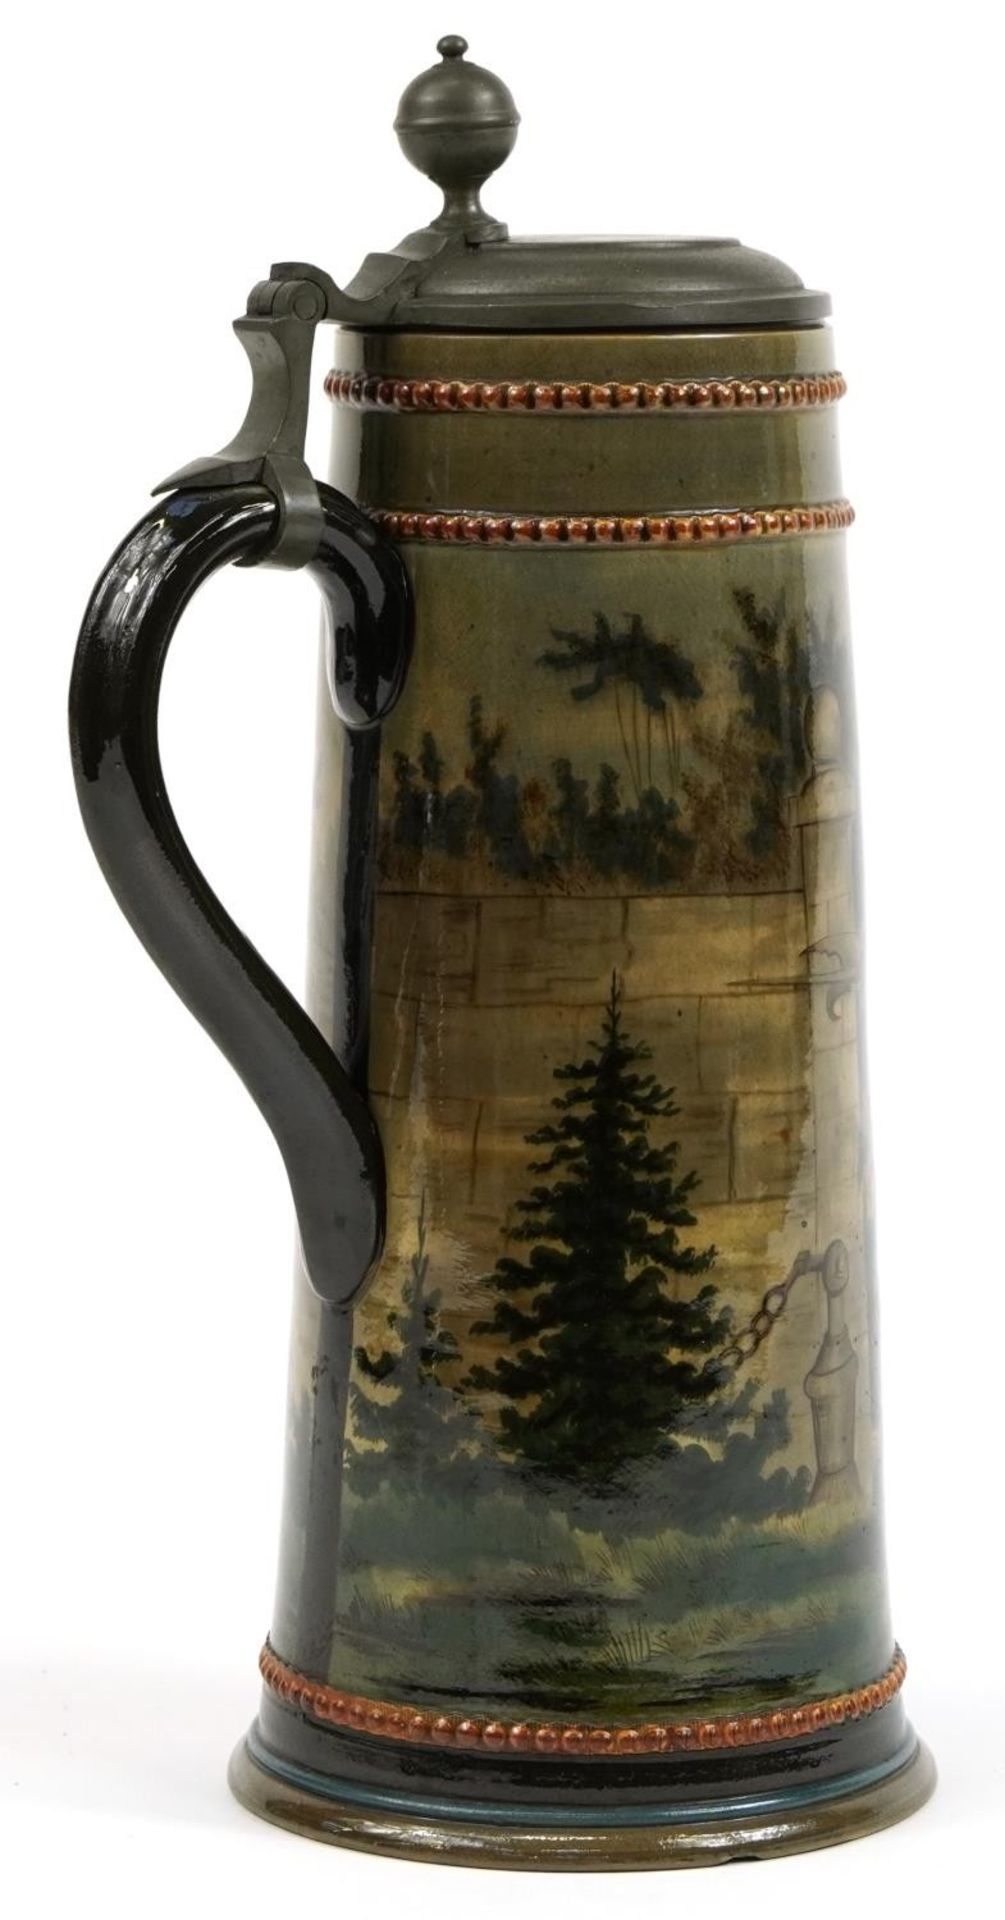 Continental potttery beerstein with pewter lid, hand painted with figures, 37cm high - Image 3 of 4